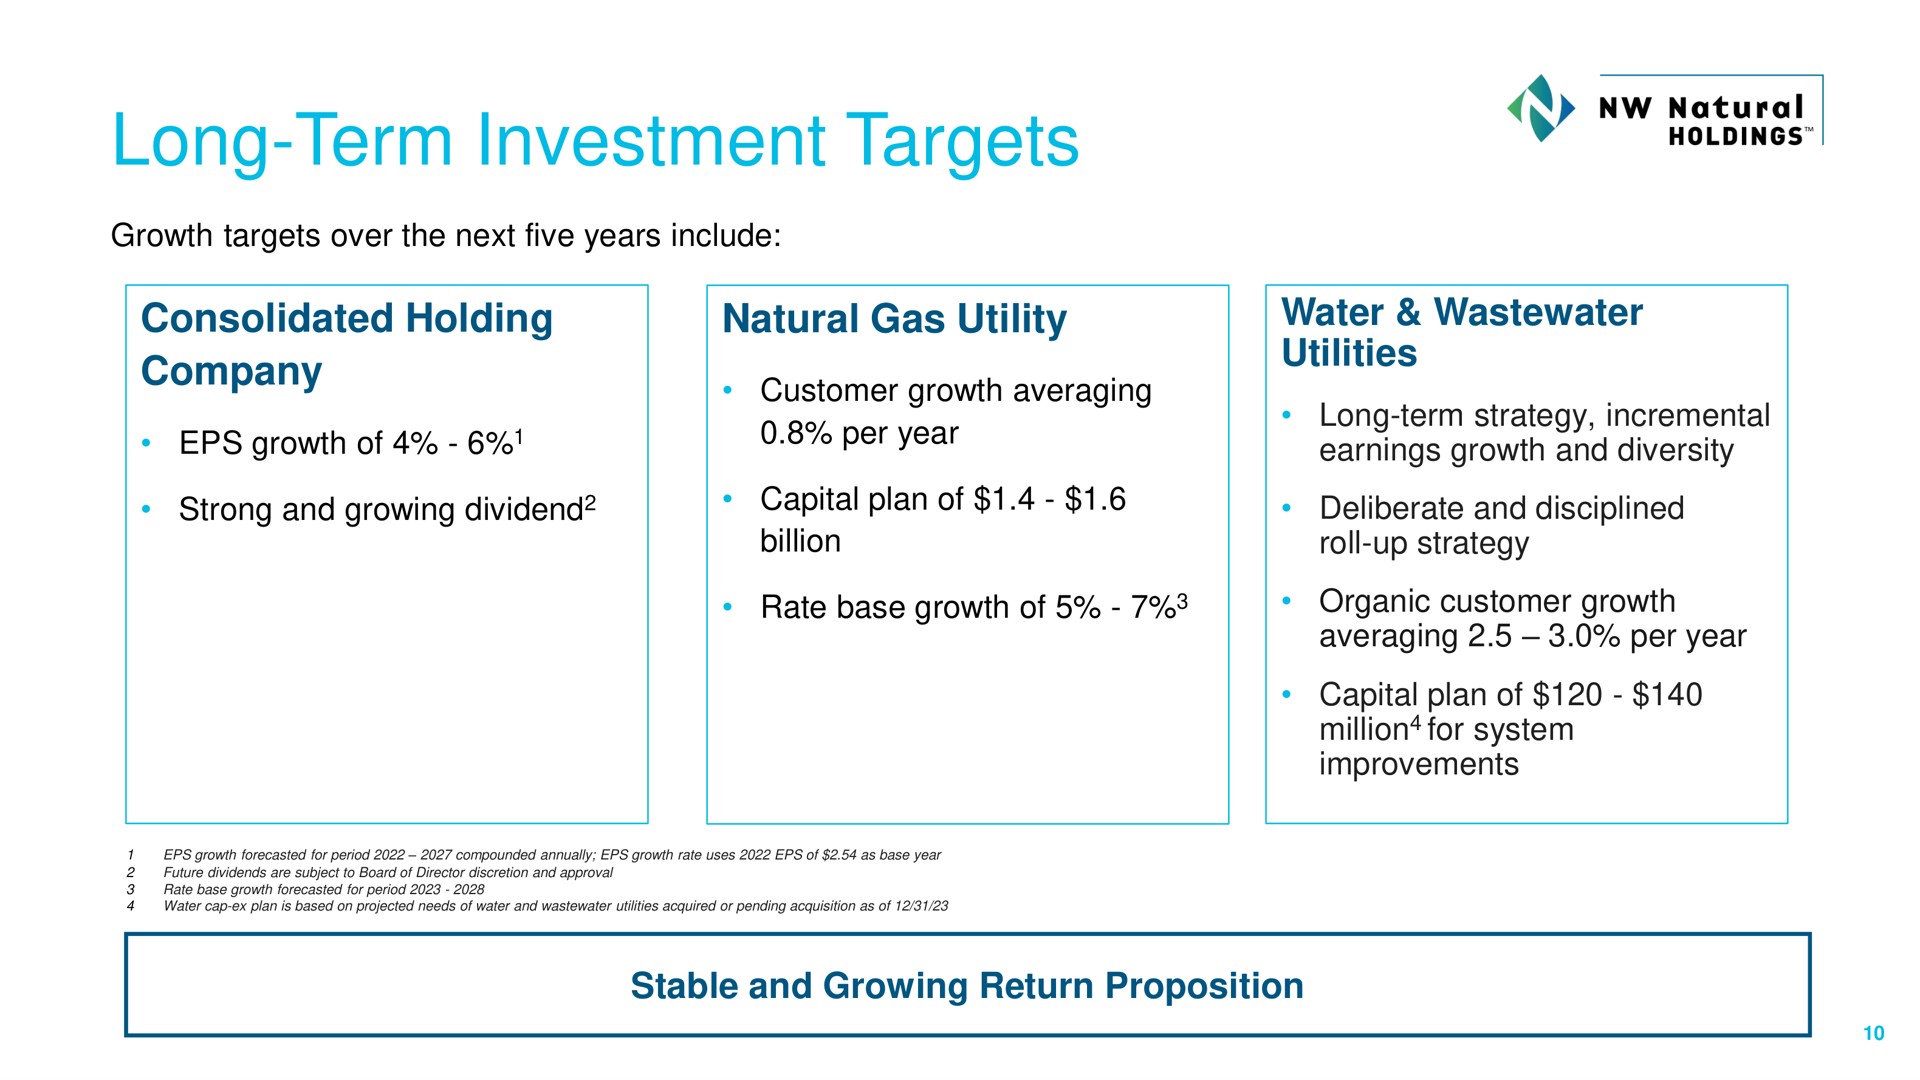 long term investment targets investment targets of year dae | NW Natural Holdings